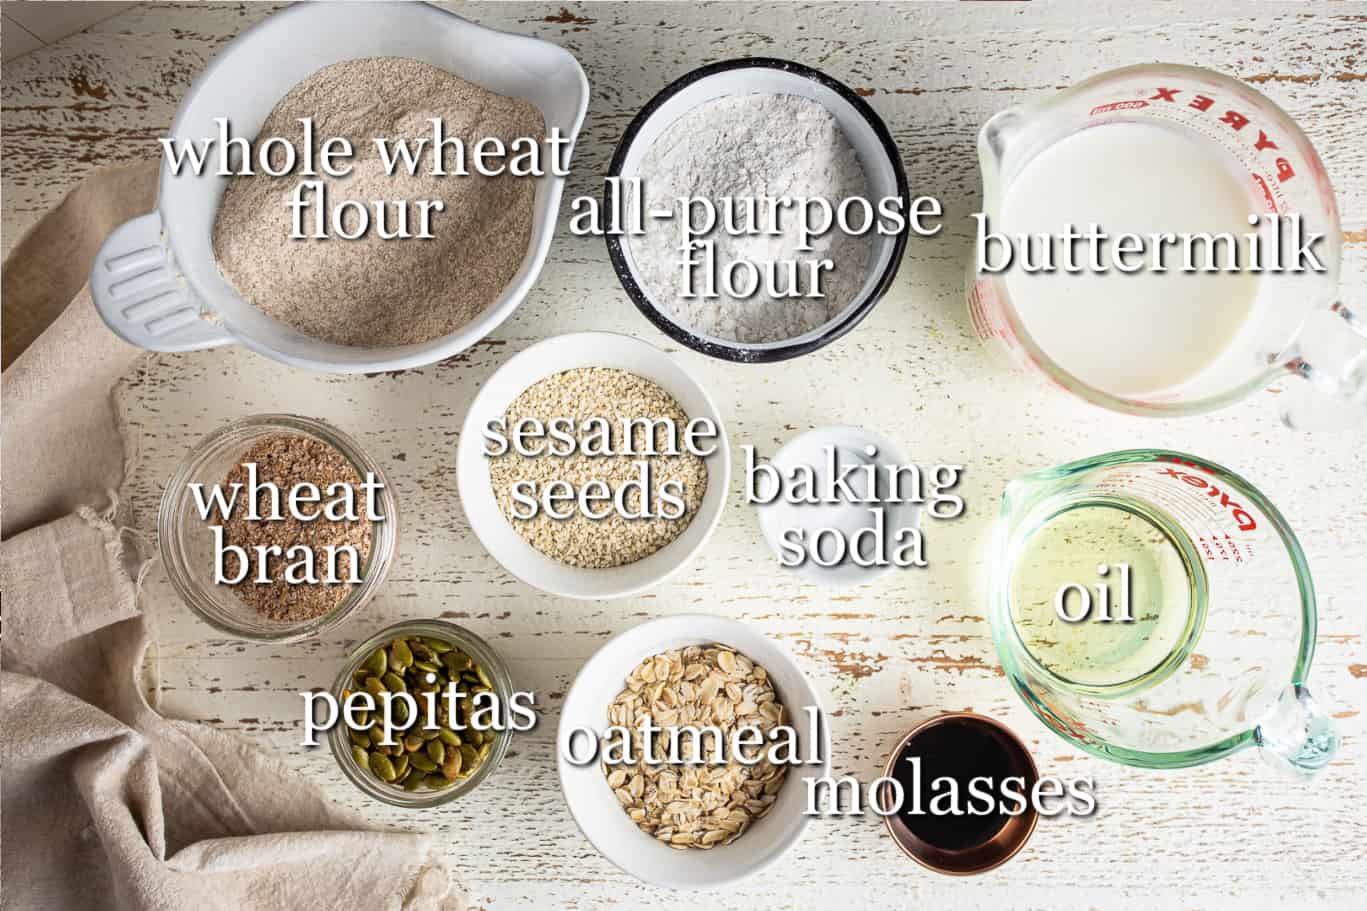 Ingredients for making Irish brown bread, with text labels.